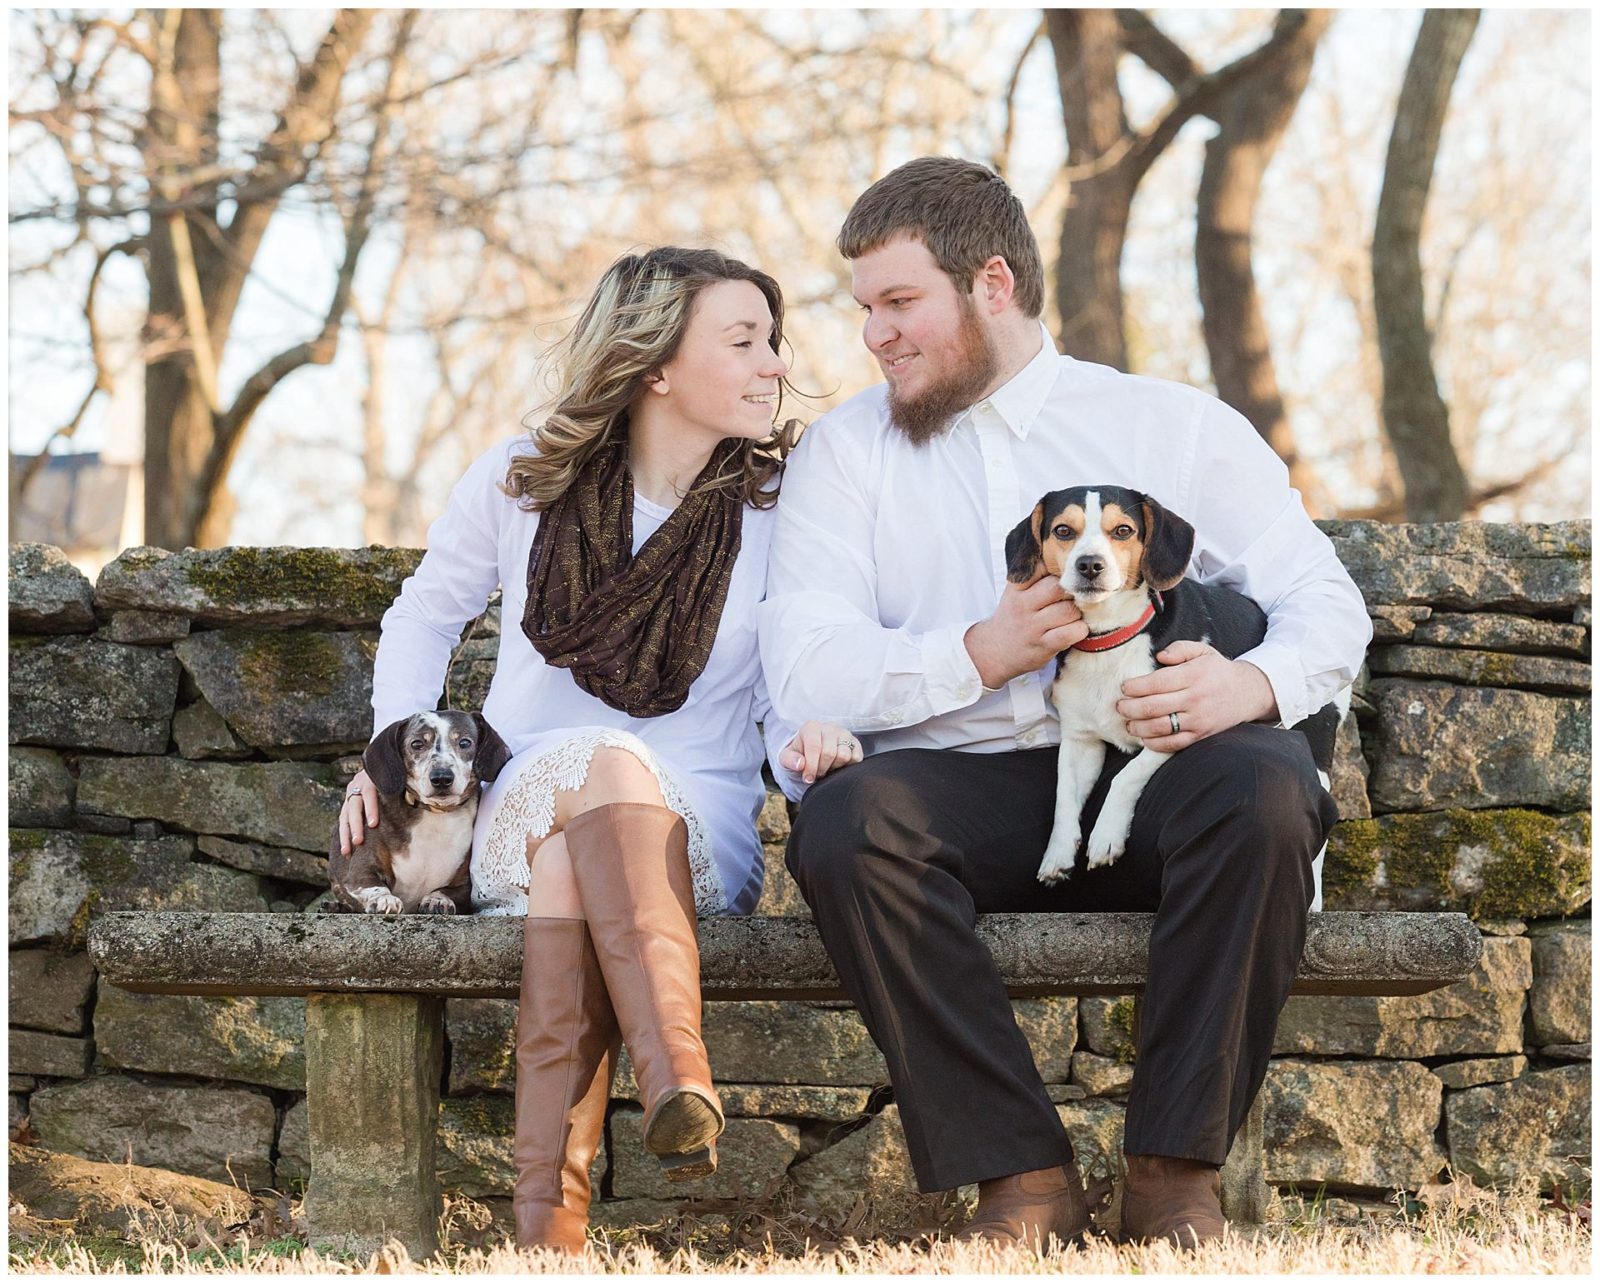 Winter engagement photos at Keene Place at Keeneland Racecourse in Lexington, KY